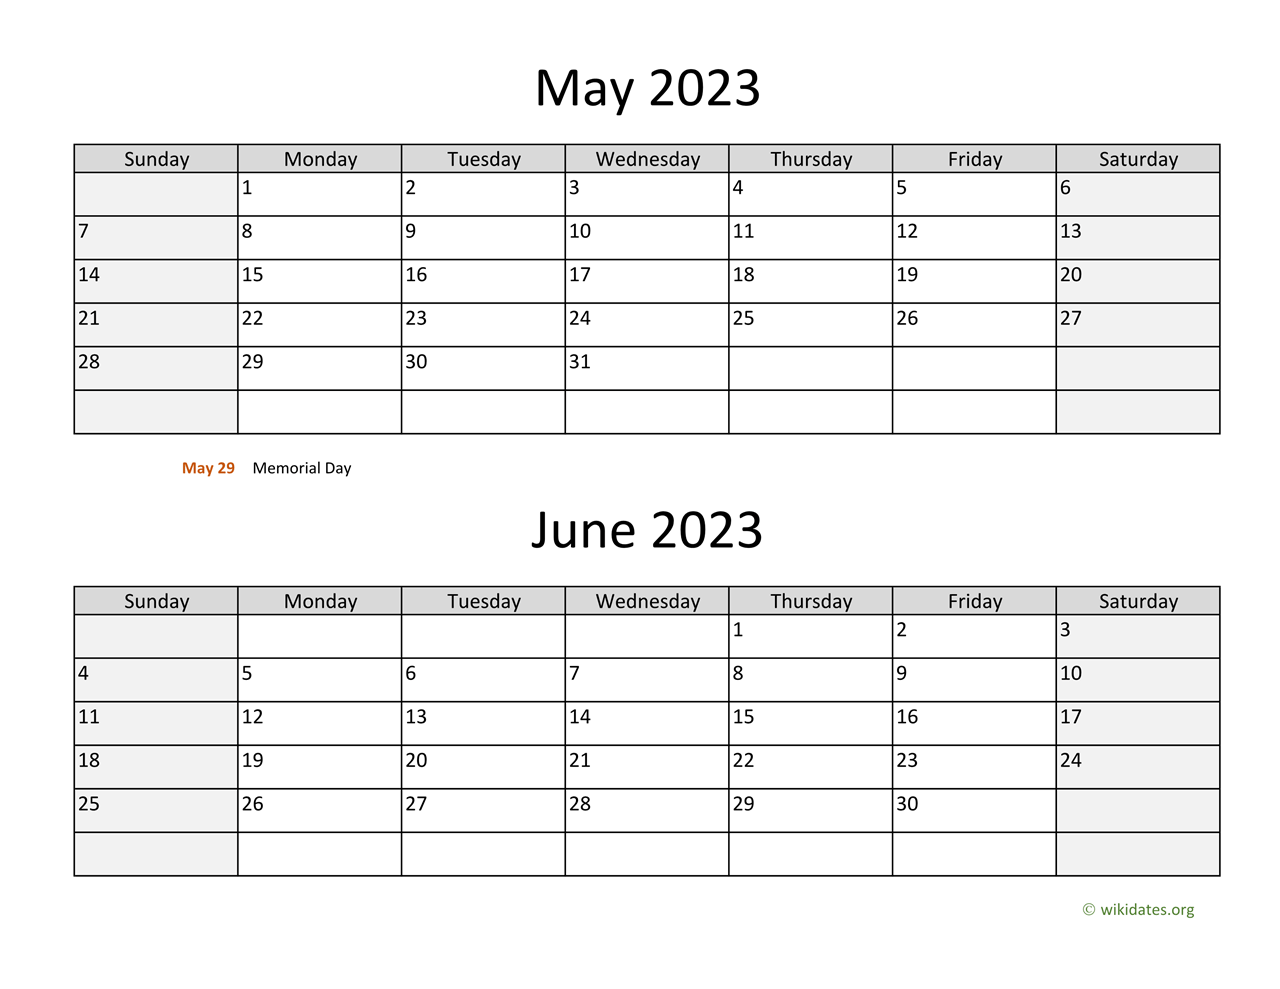 may and june 2023 calendar wikidates org